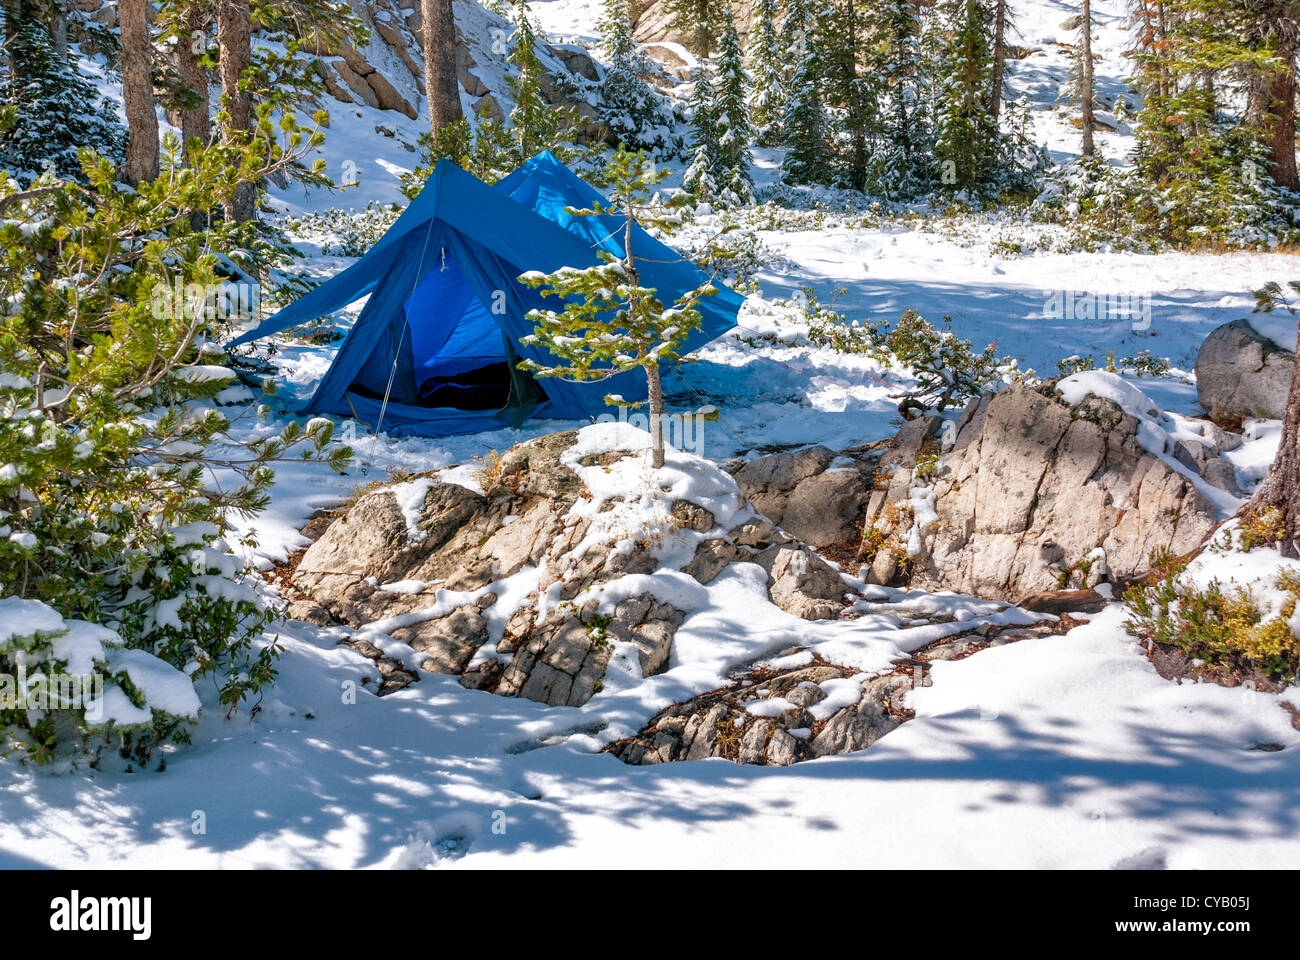 Idaho forest in the winter with a blue tent Stock Photo